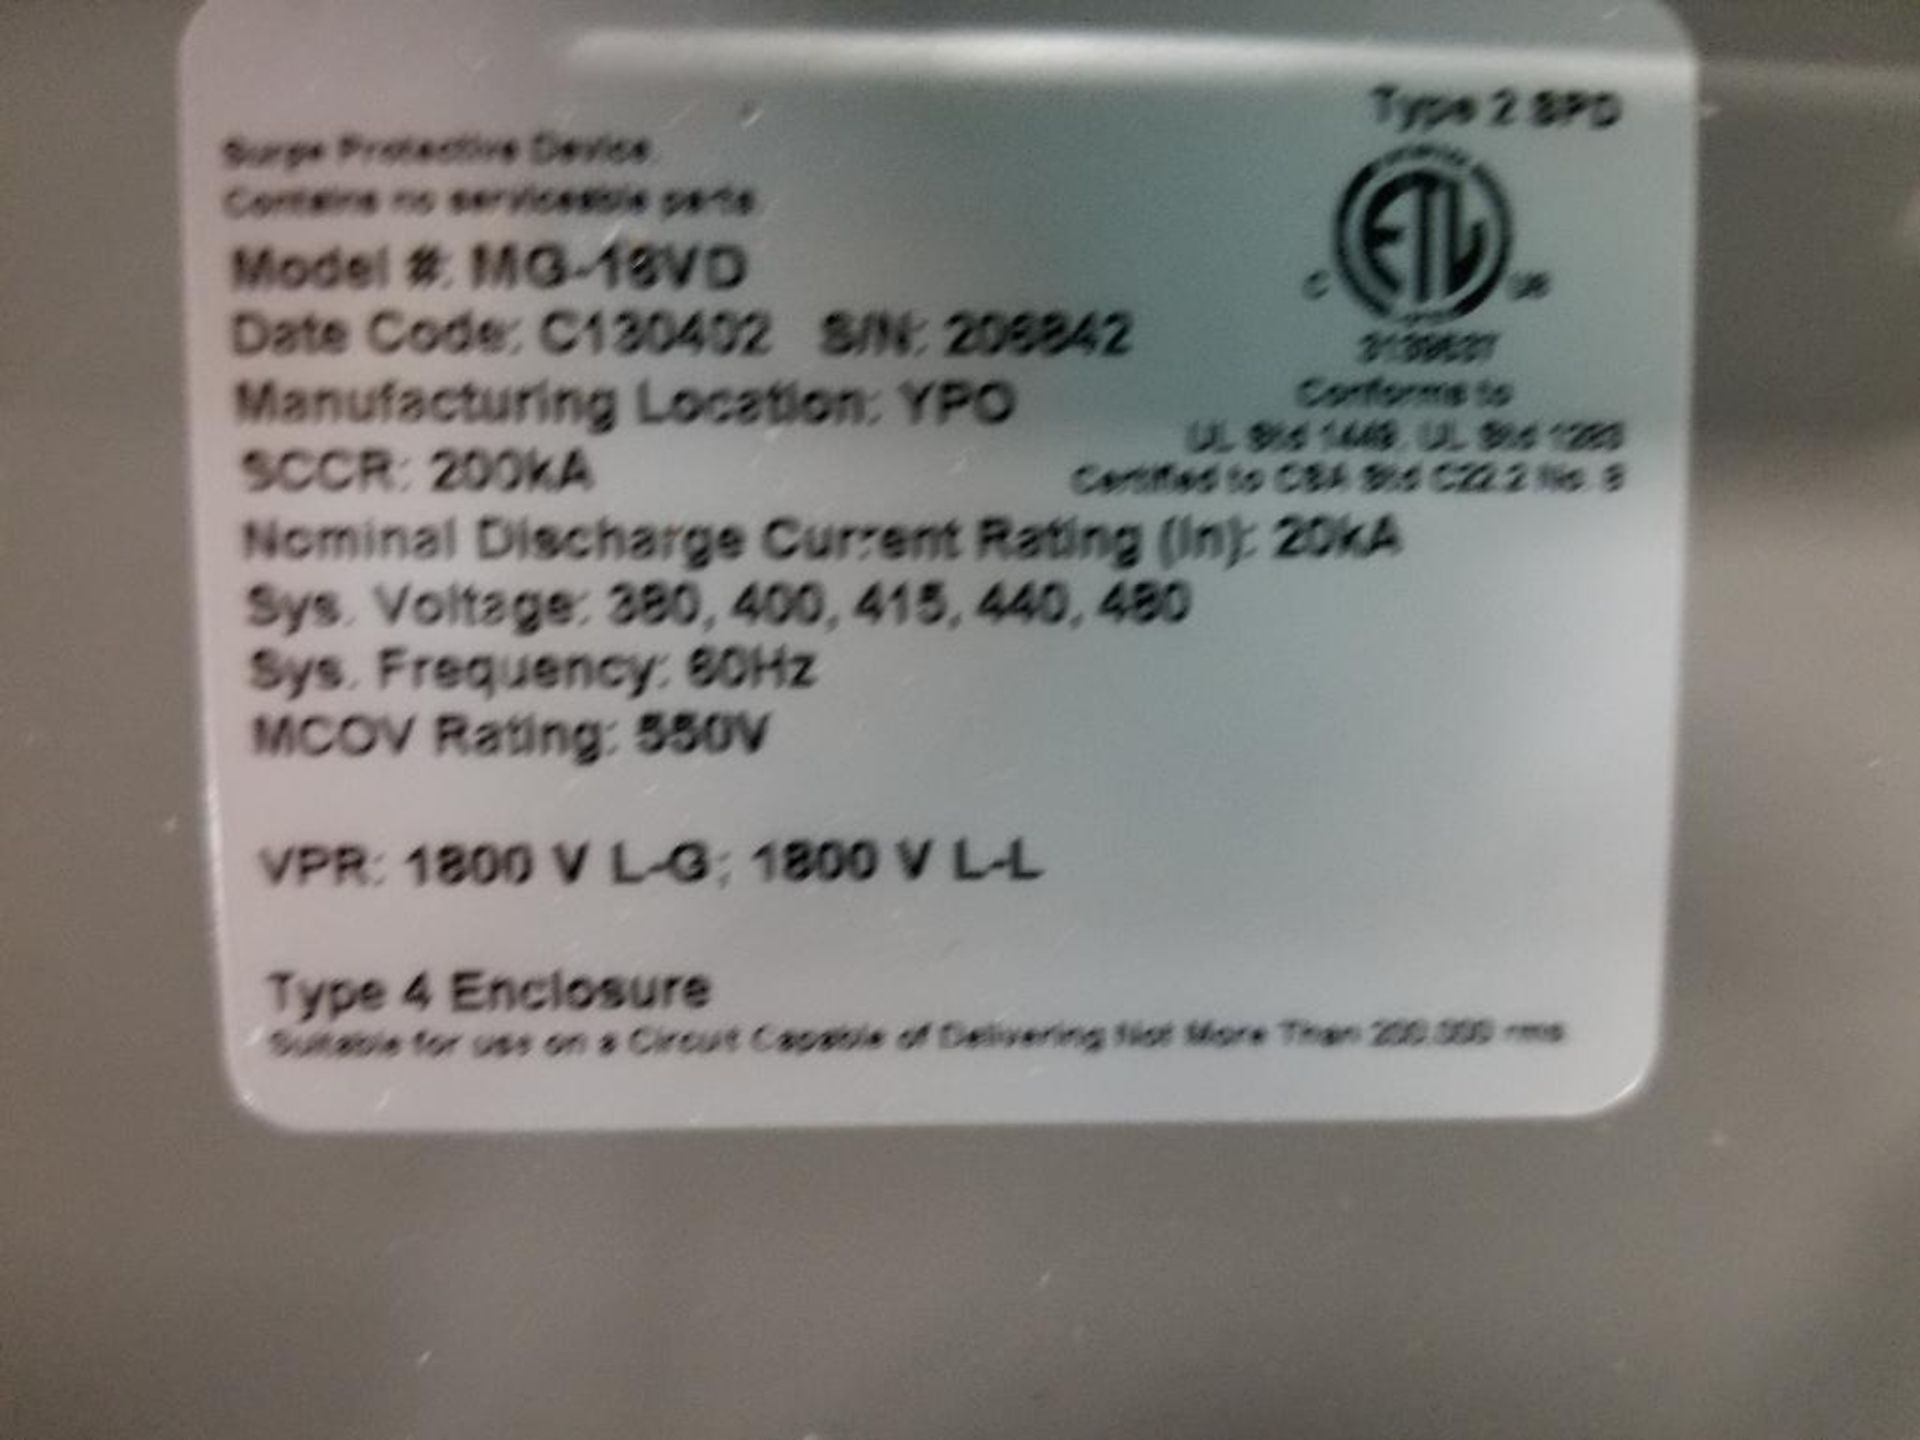 Eaton surge protection device. Model MG-16VD. New in box. - Image 6 of 6